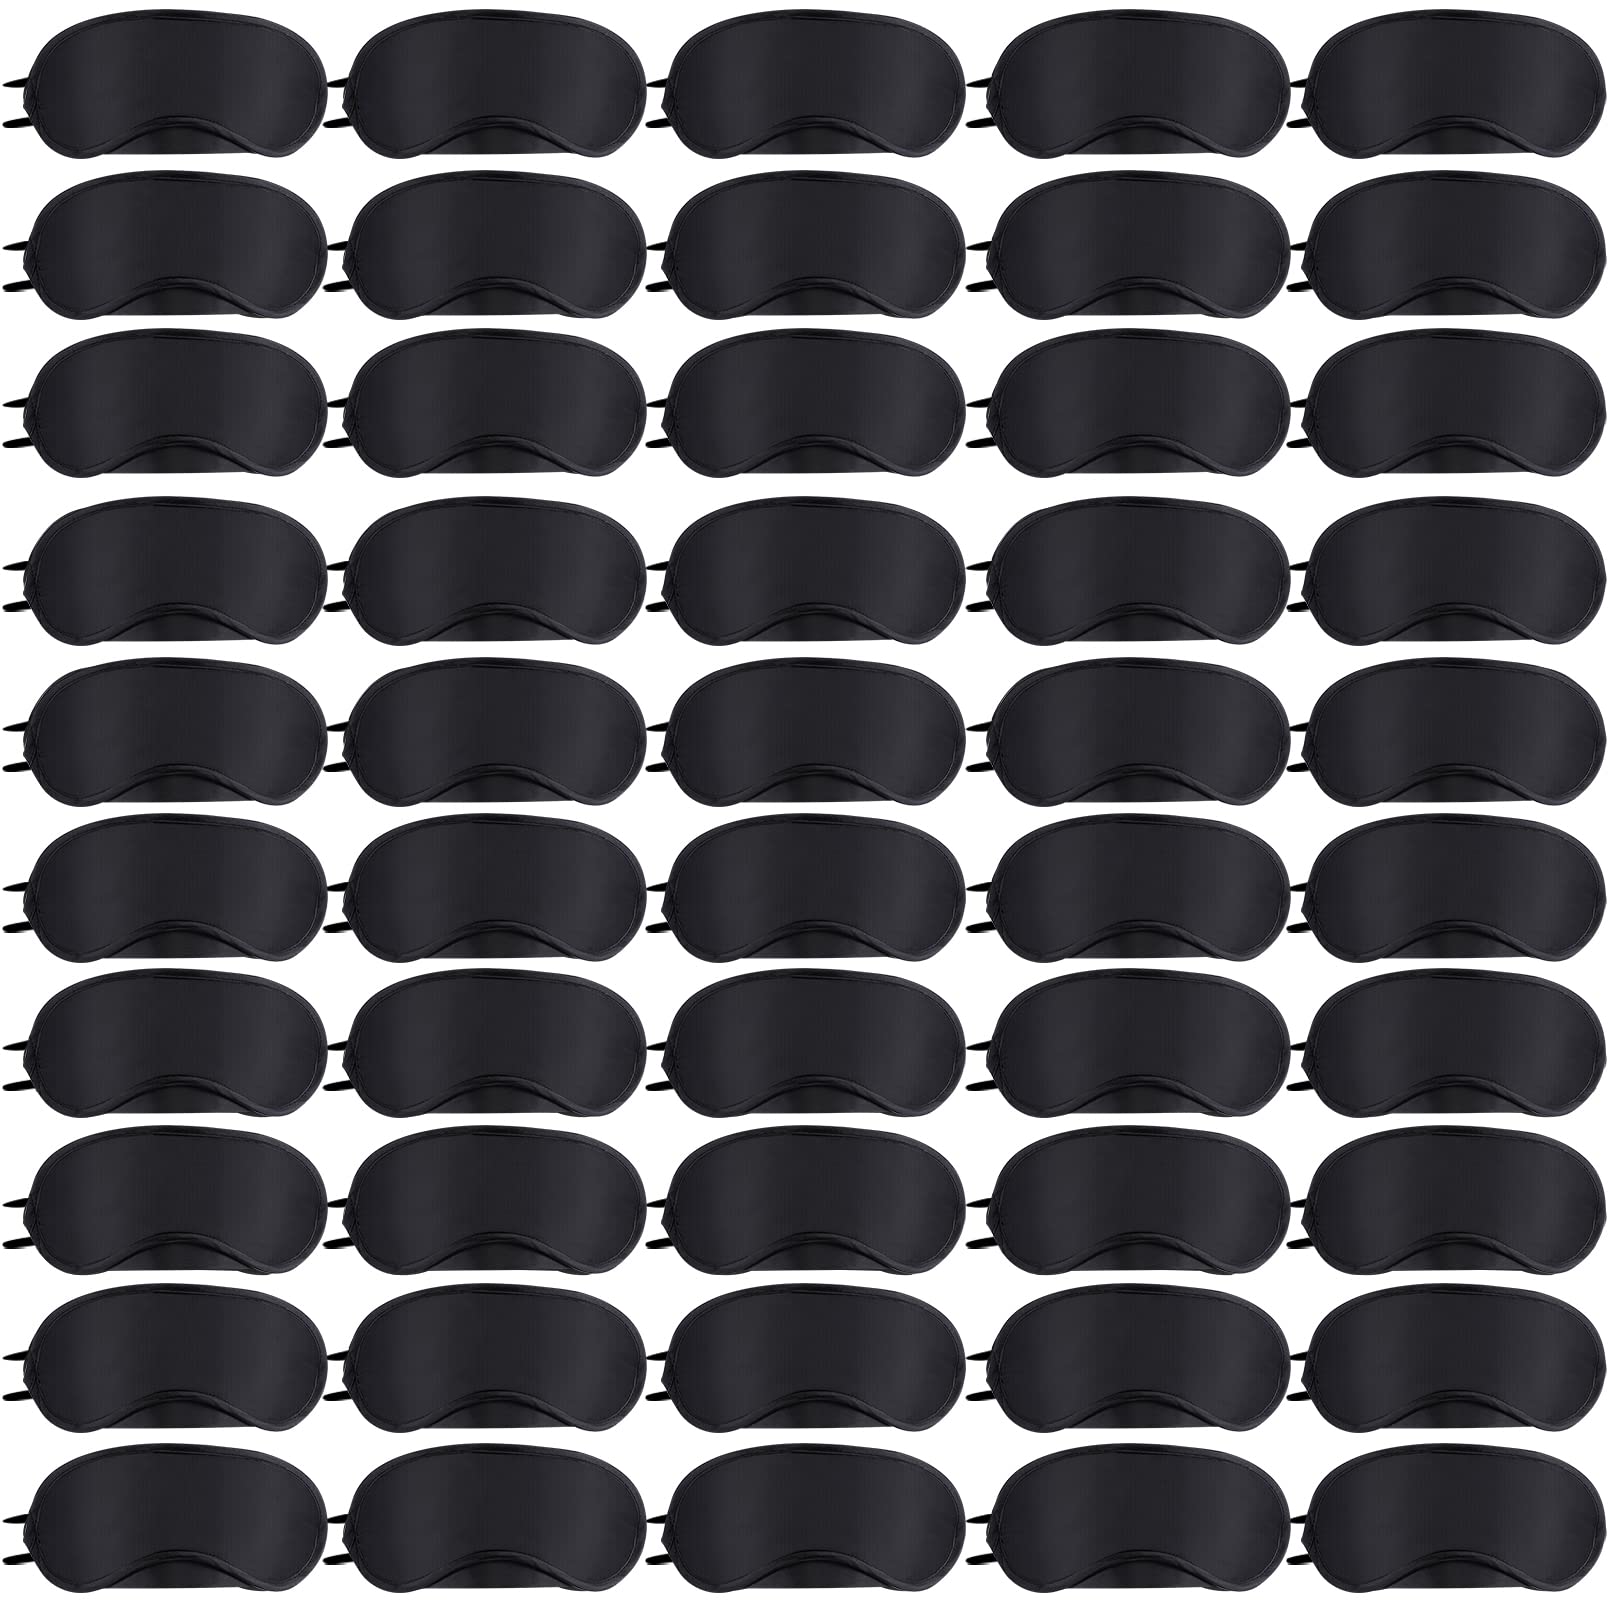 Mudder 12 Pack Eye Mask Cover Shade Blindfold with Nose Pad for Travel  Sleep Game, Black